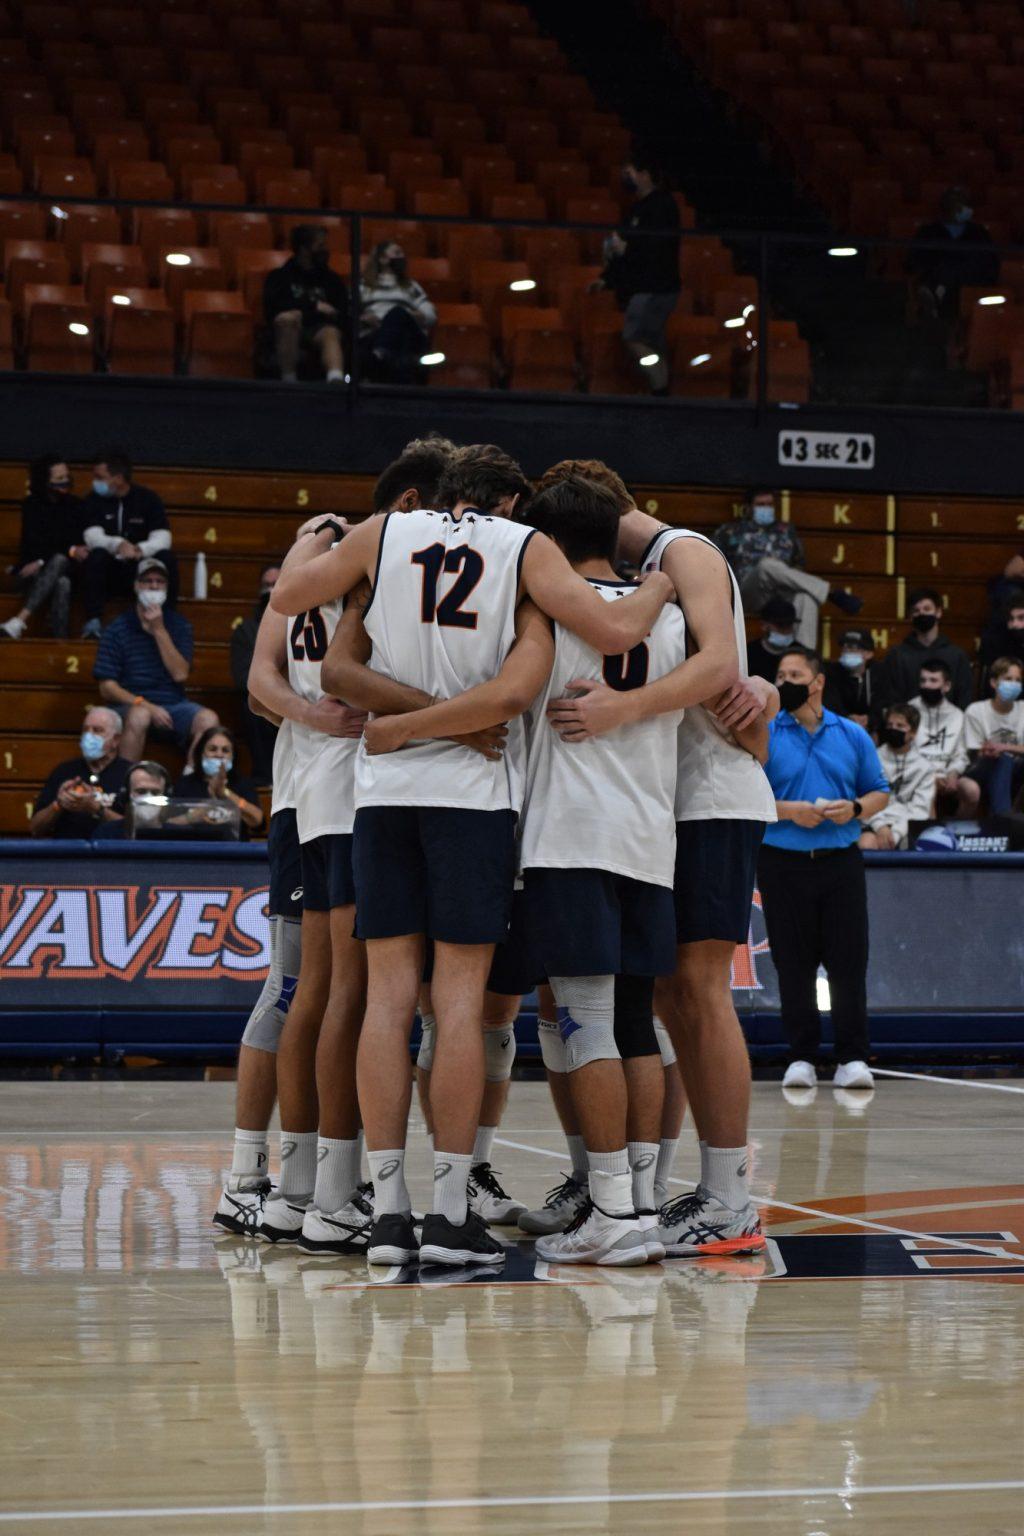 The Waves gather for a hug in between points during their match against UC Irvine in Firestone Fieldhouse on Feb. 9. The Waves bounced back from a slow start and won the match in straight sets, 25-21, 25-17, 27-25.